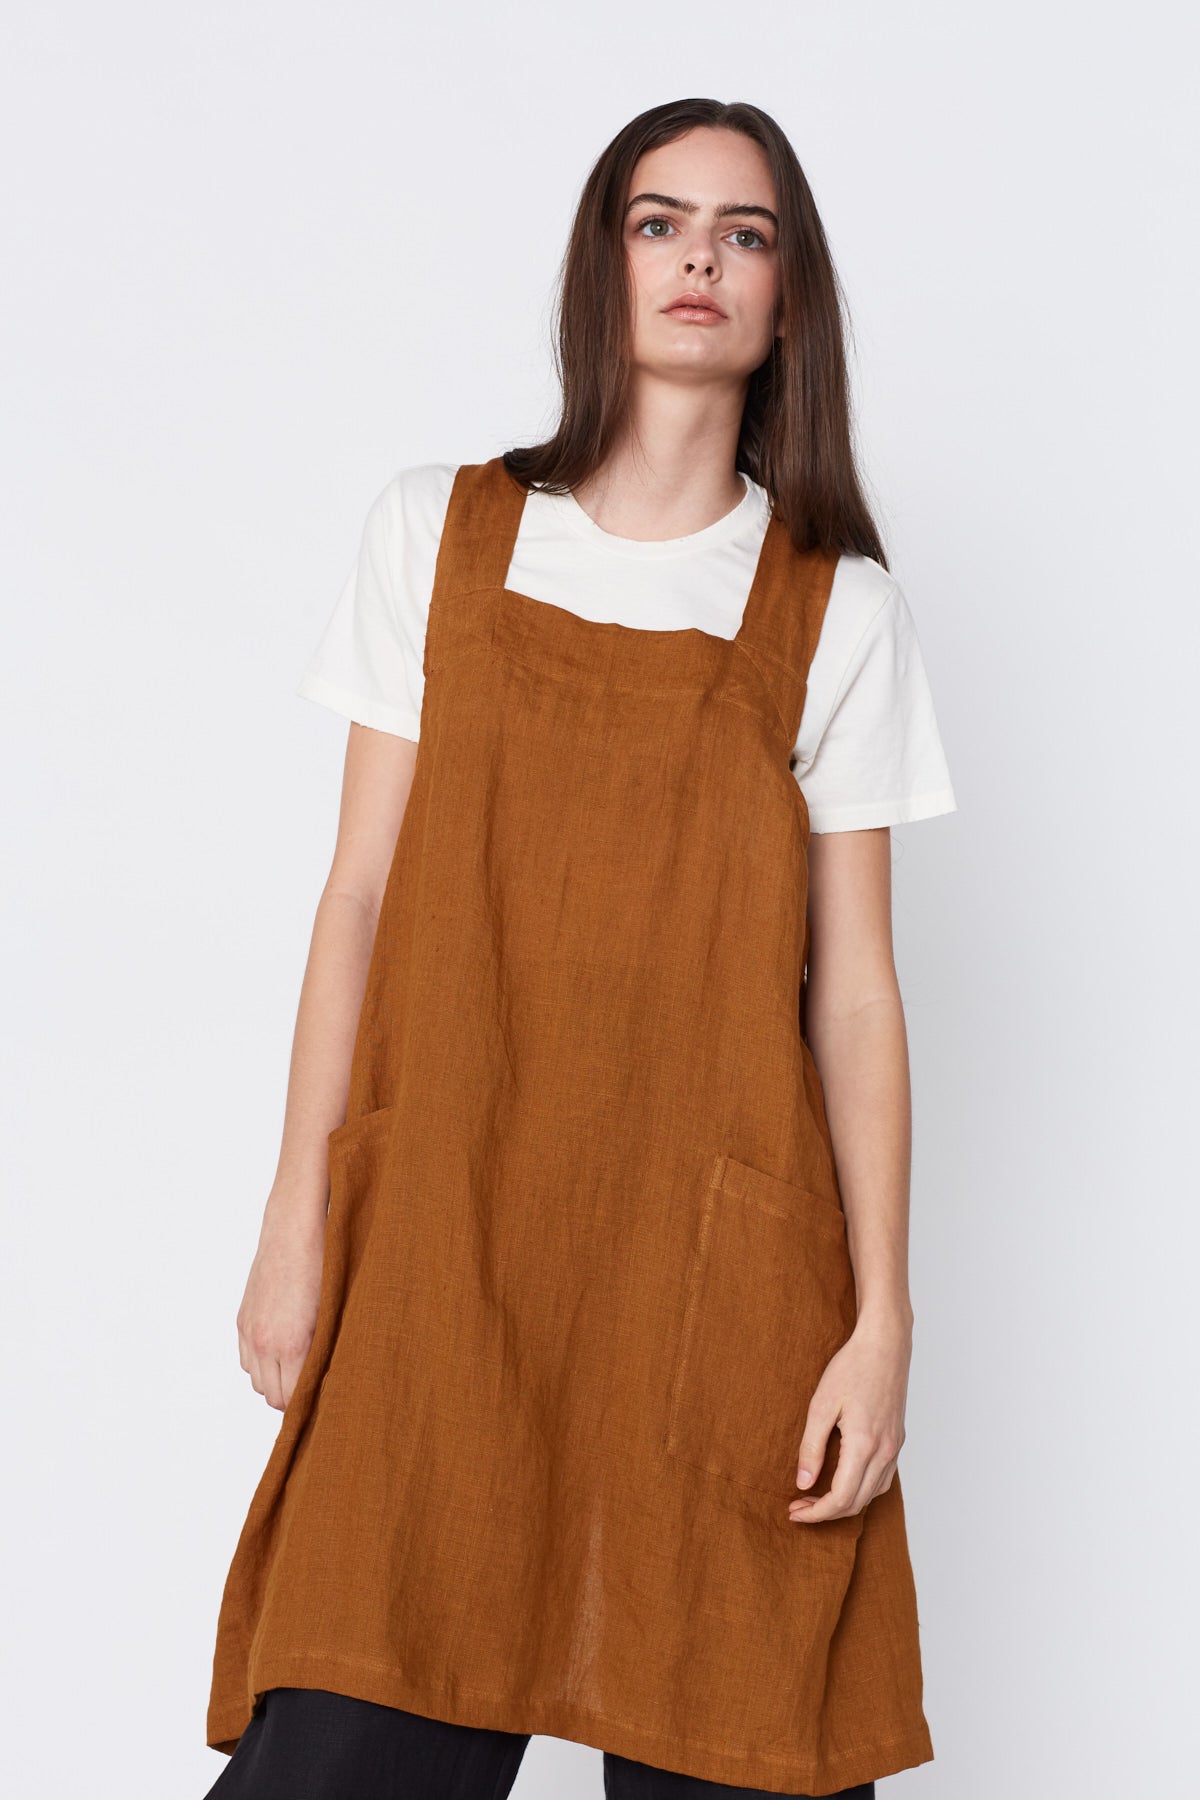 Linen Pinafore Apron in Ocre. Made in Atlanta, ethically and sustainably, by slow fashion designer Megan Huntz. 